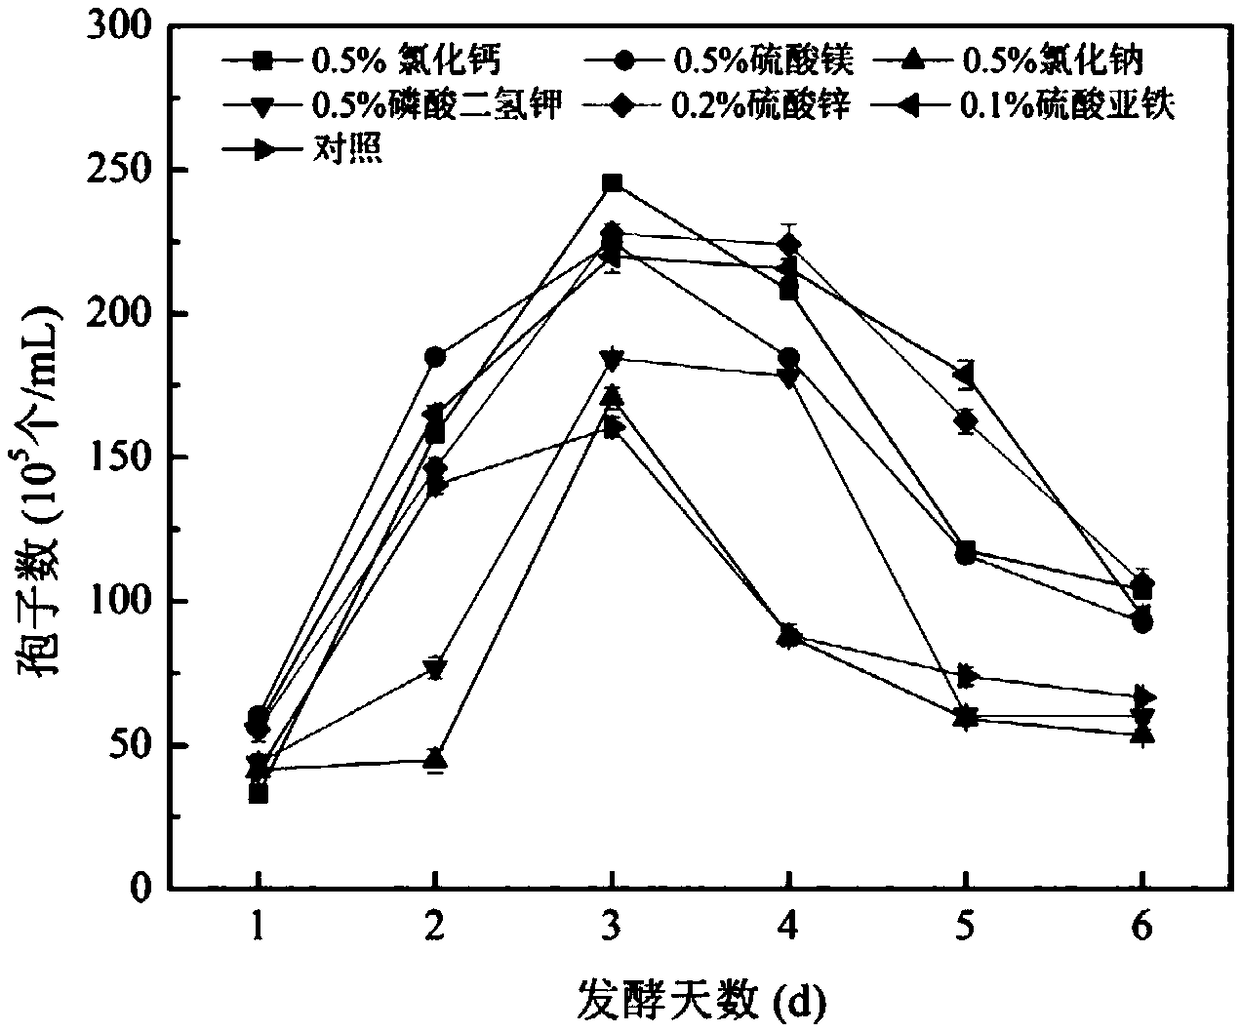 Eurotium cristatum liquid state fermentation method of ginkgo seeds, and product prepared by eurotium cristatum liquid state fermentation method and application of product